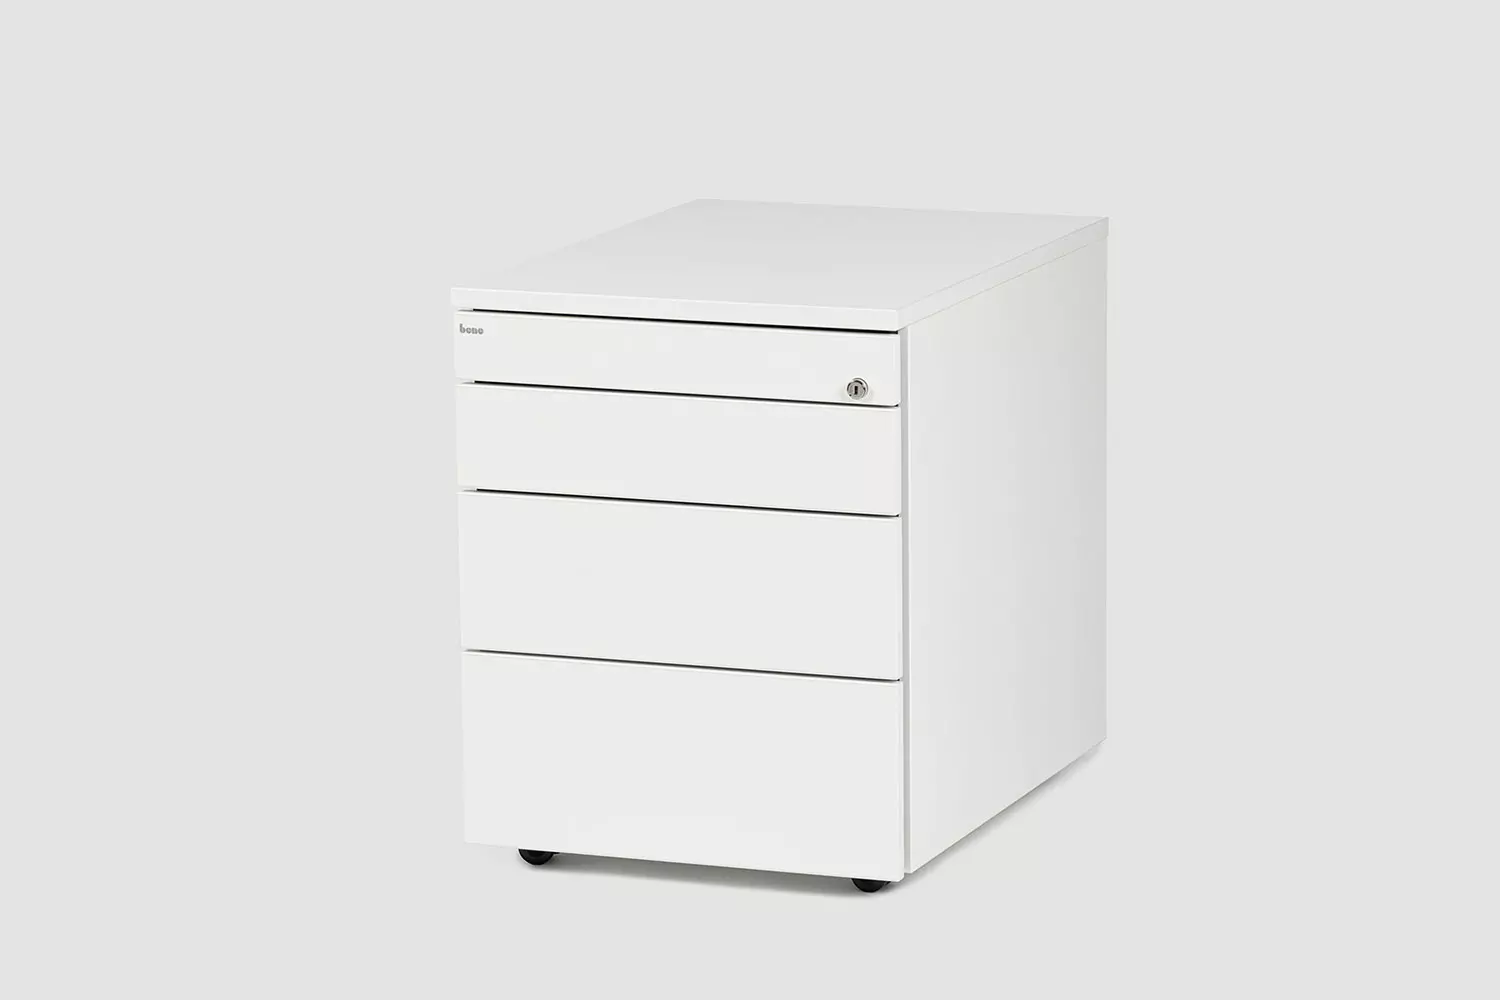 CT Container, Pedestal, Bene Office furniture, Image 1